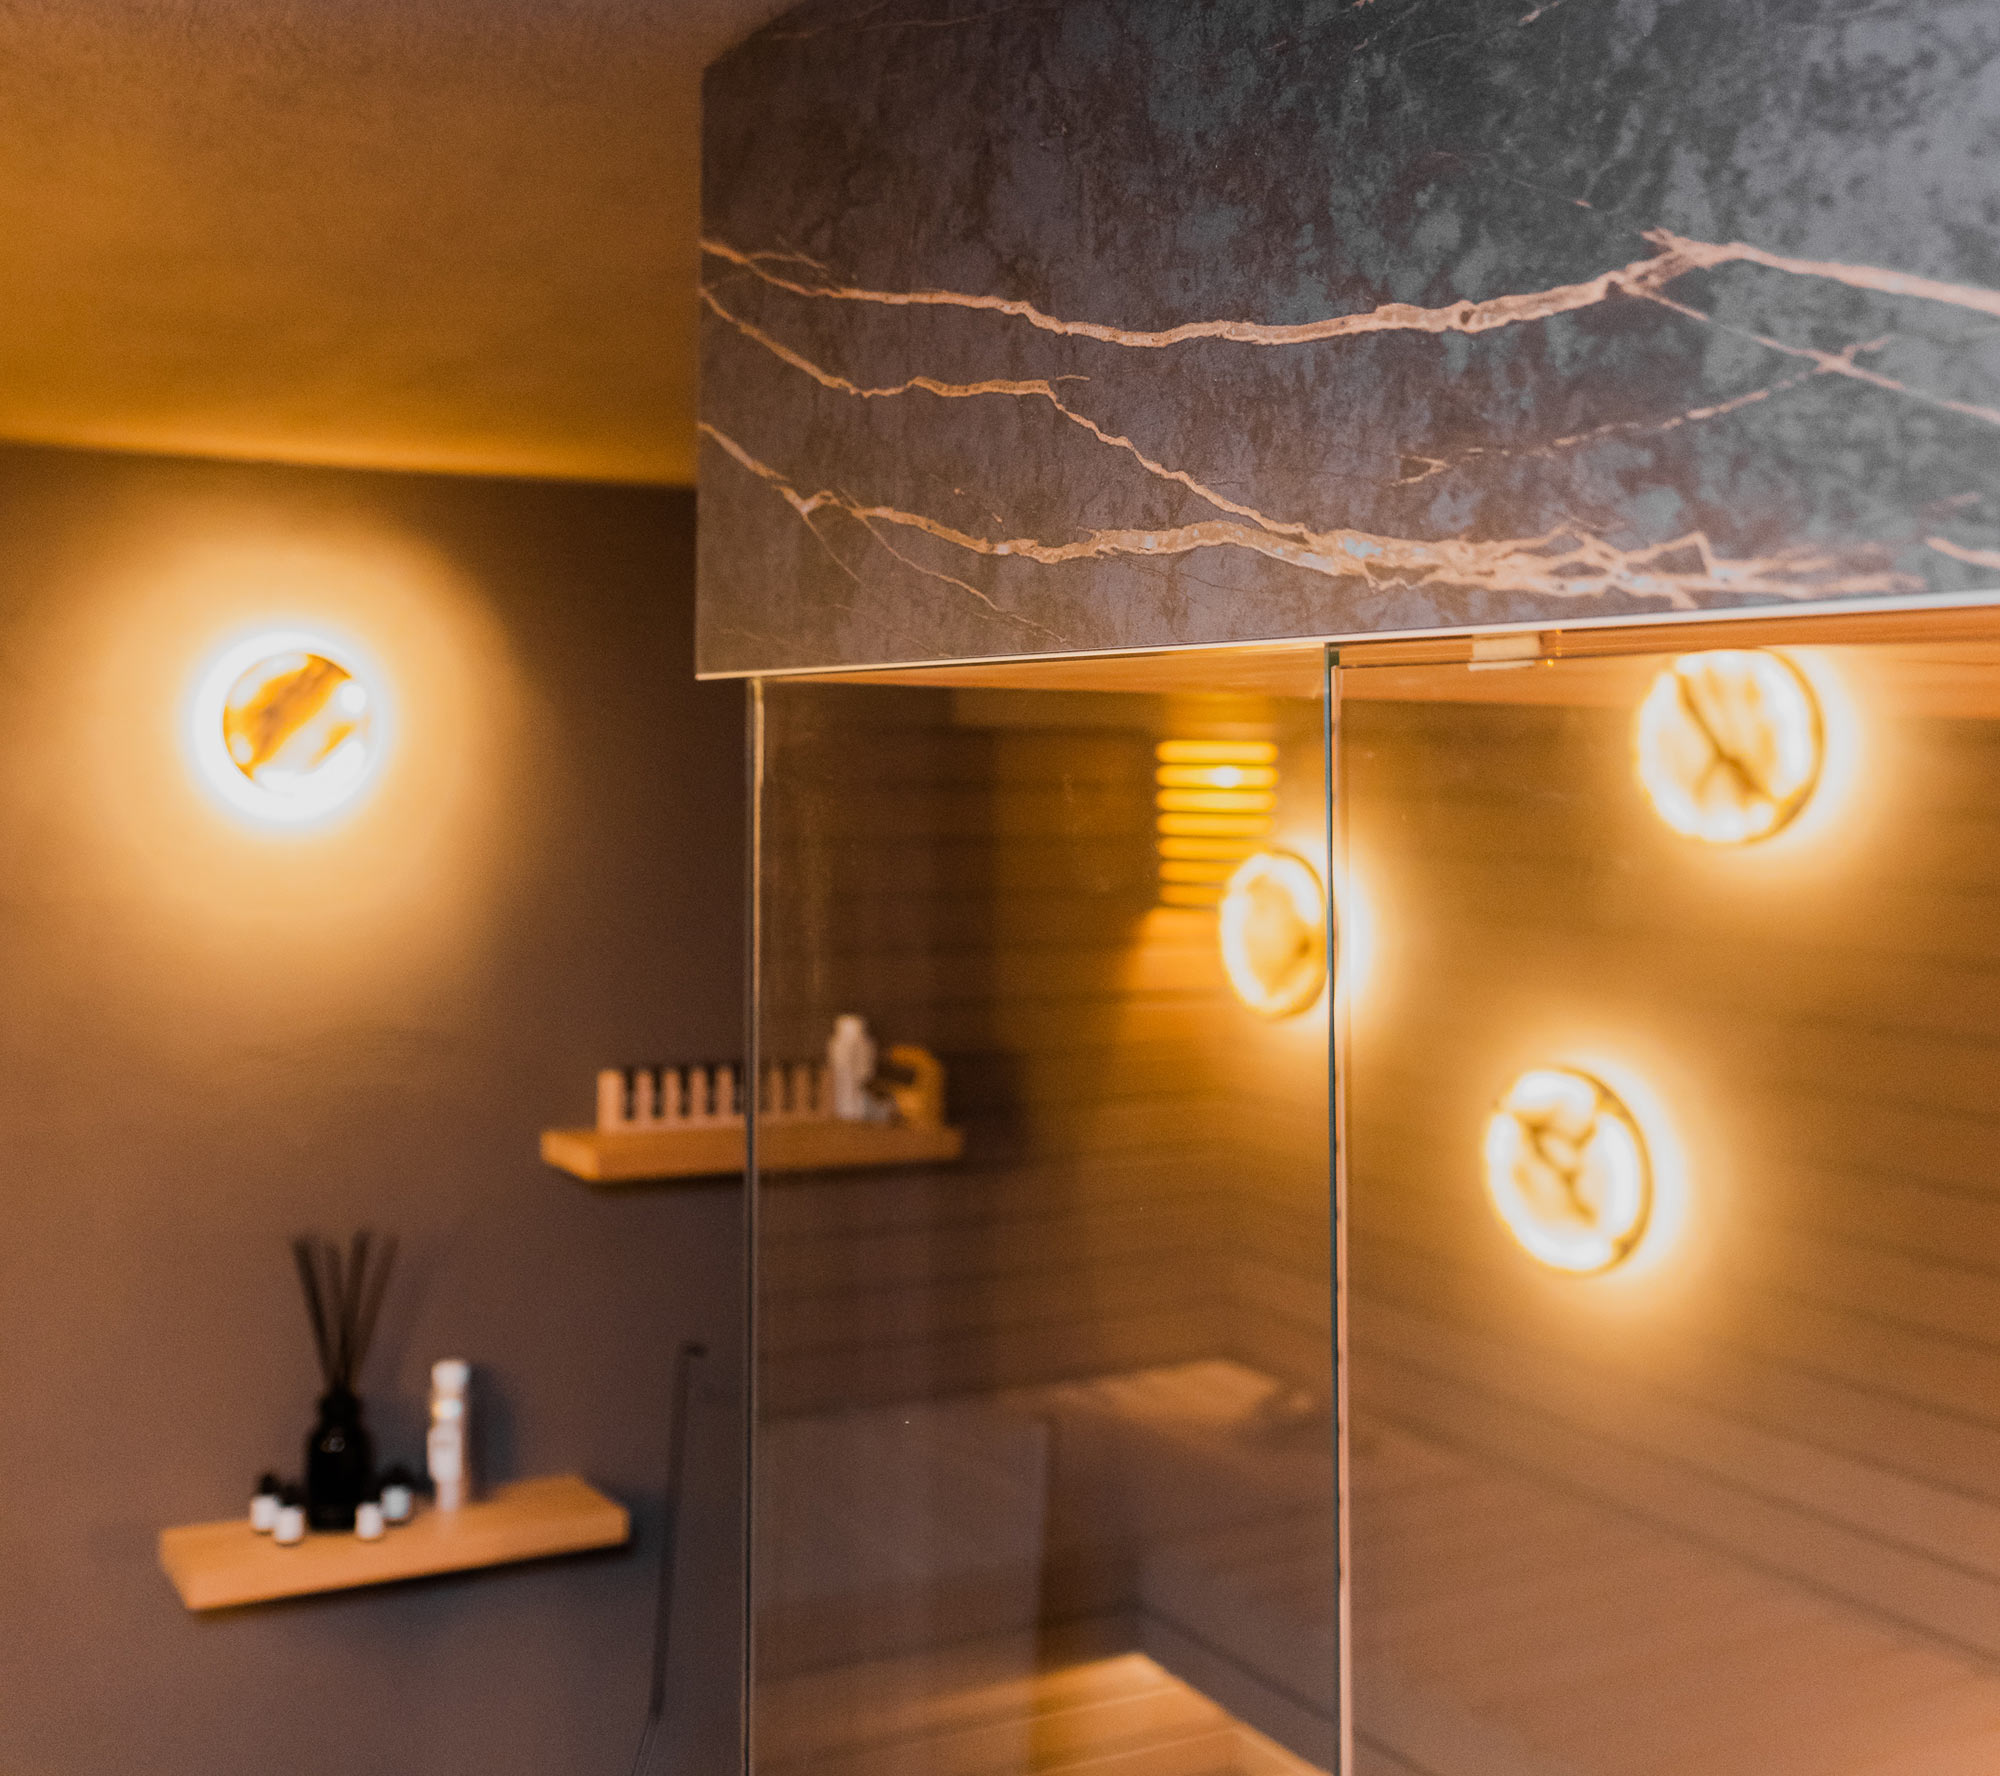 Image of sauna suiza laurent 5 in This sauna reaches its full wellness potential thanks to Dekton - Cosentino